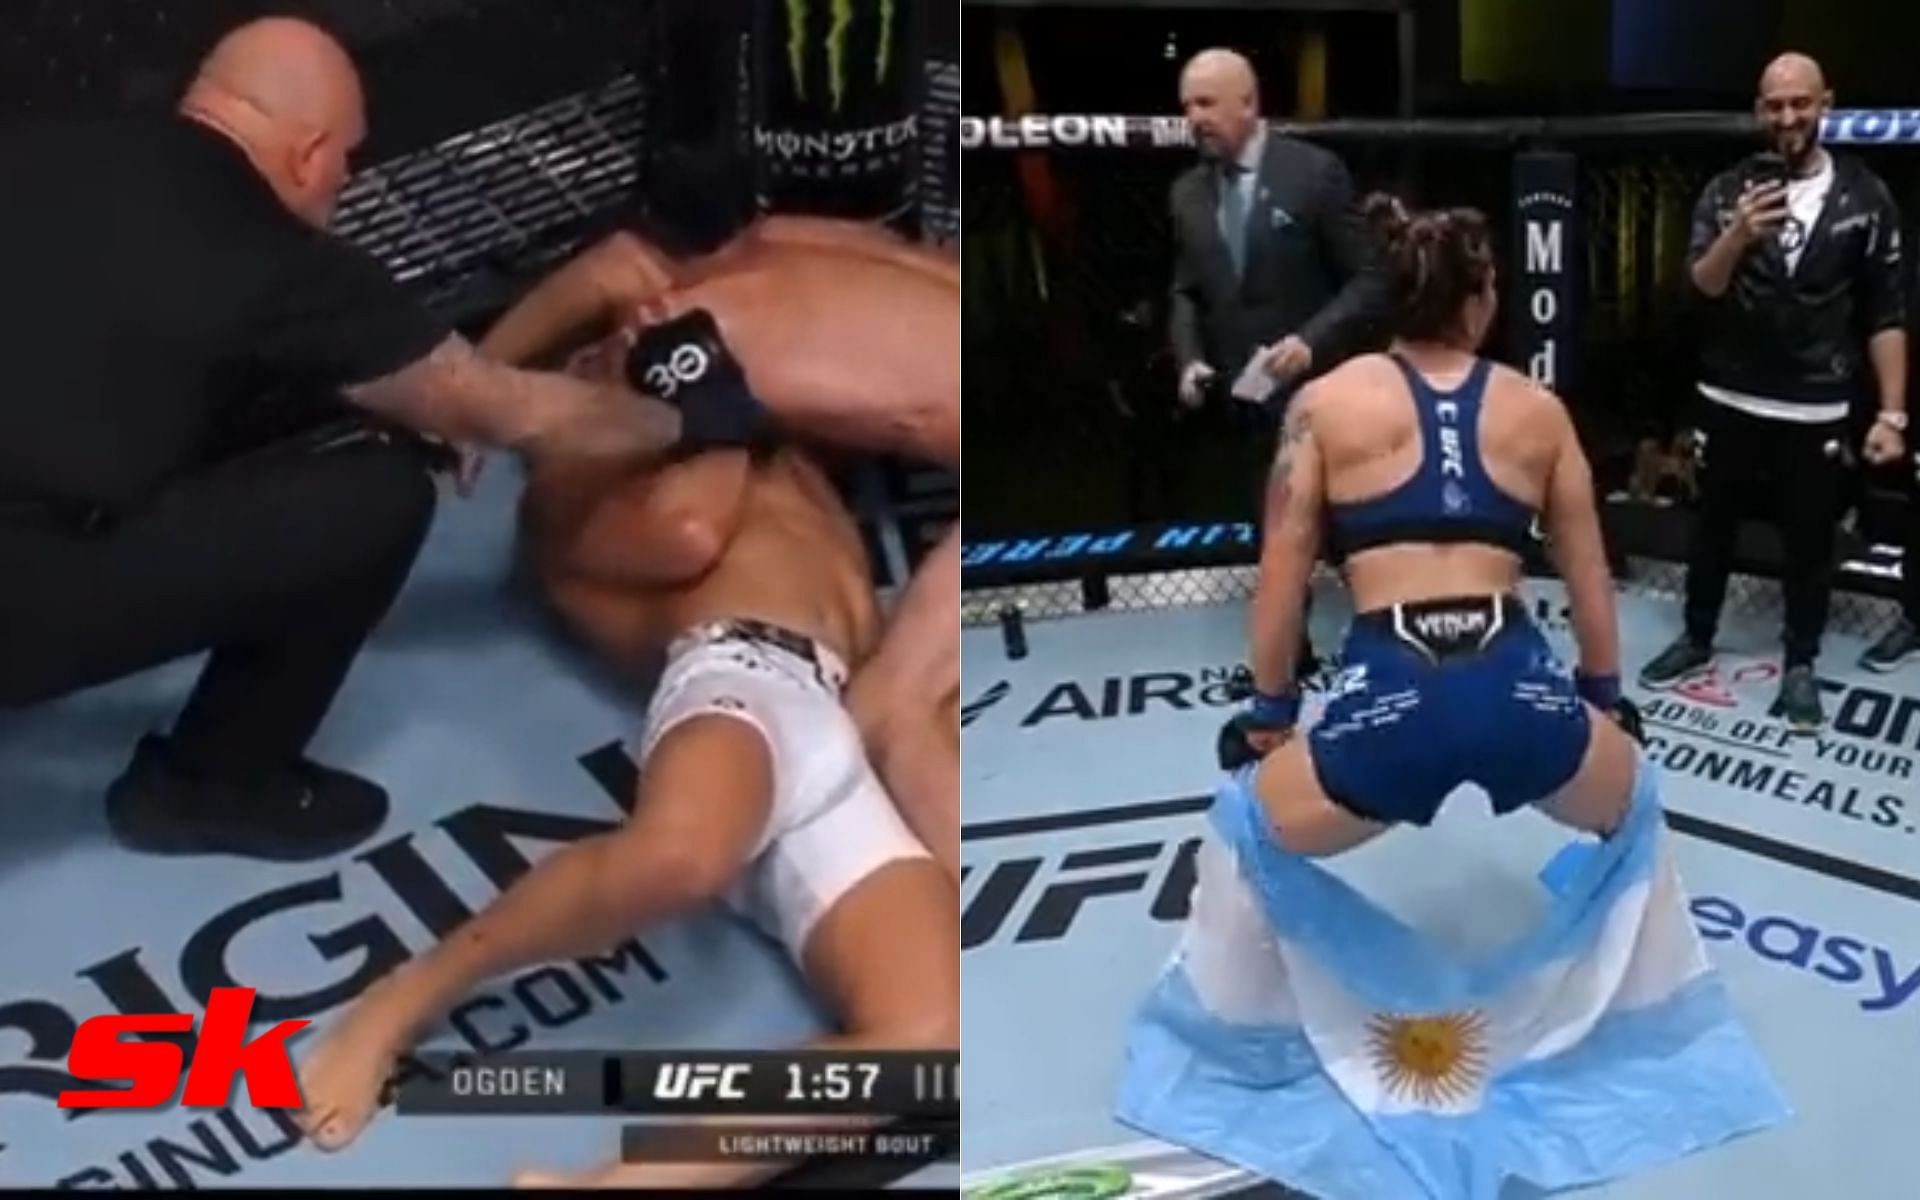 Mike Beltran stopping a UFC Vegas 82 fight (left), Ailin Perez twerking inside the cage (right) [Image credits: @spinninbackfist, @JustTheFights]